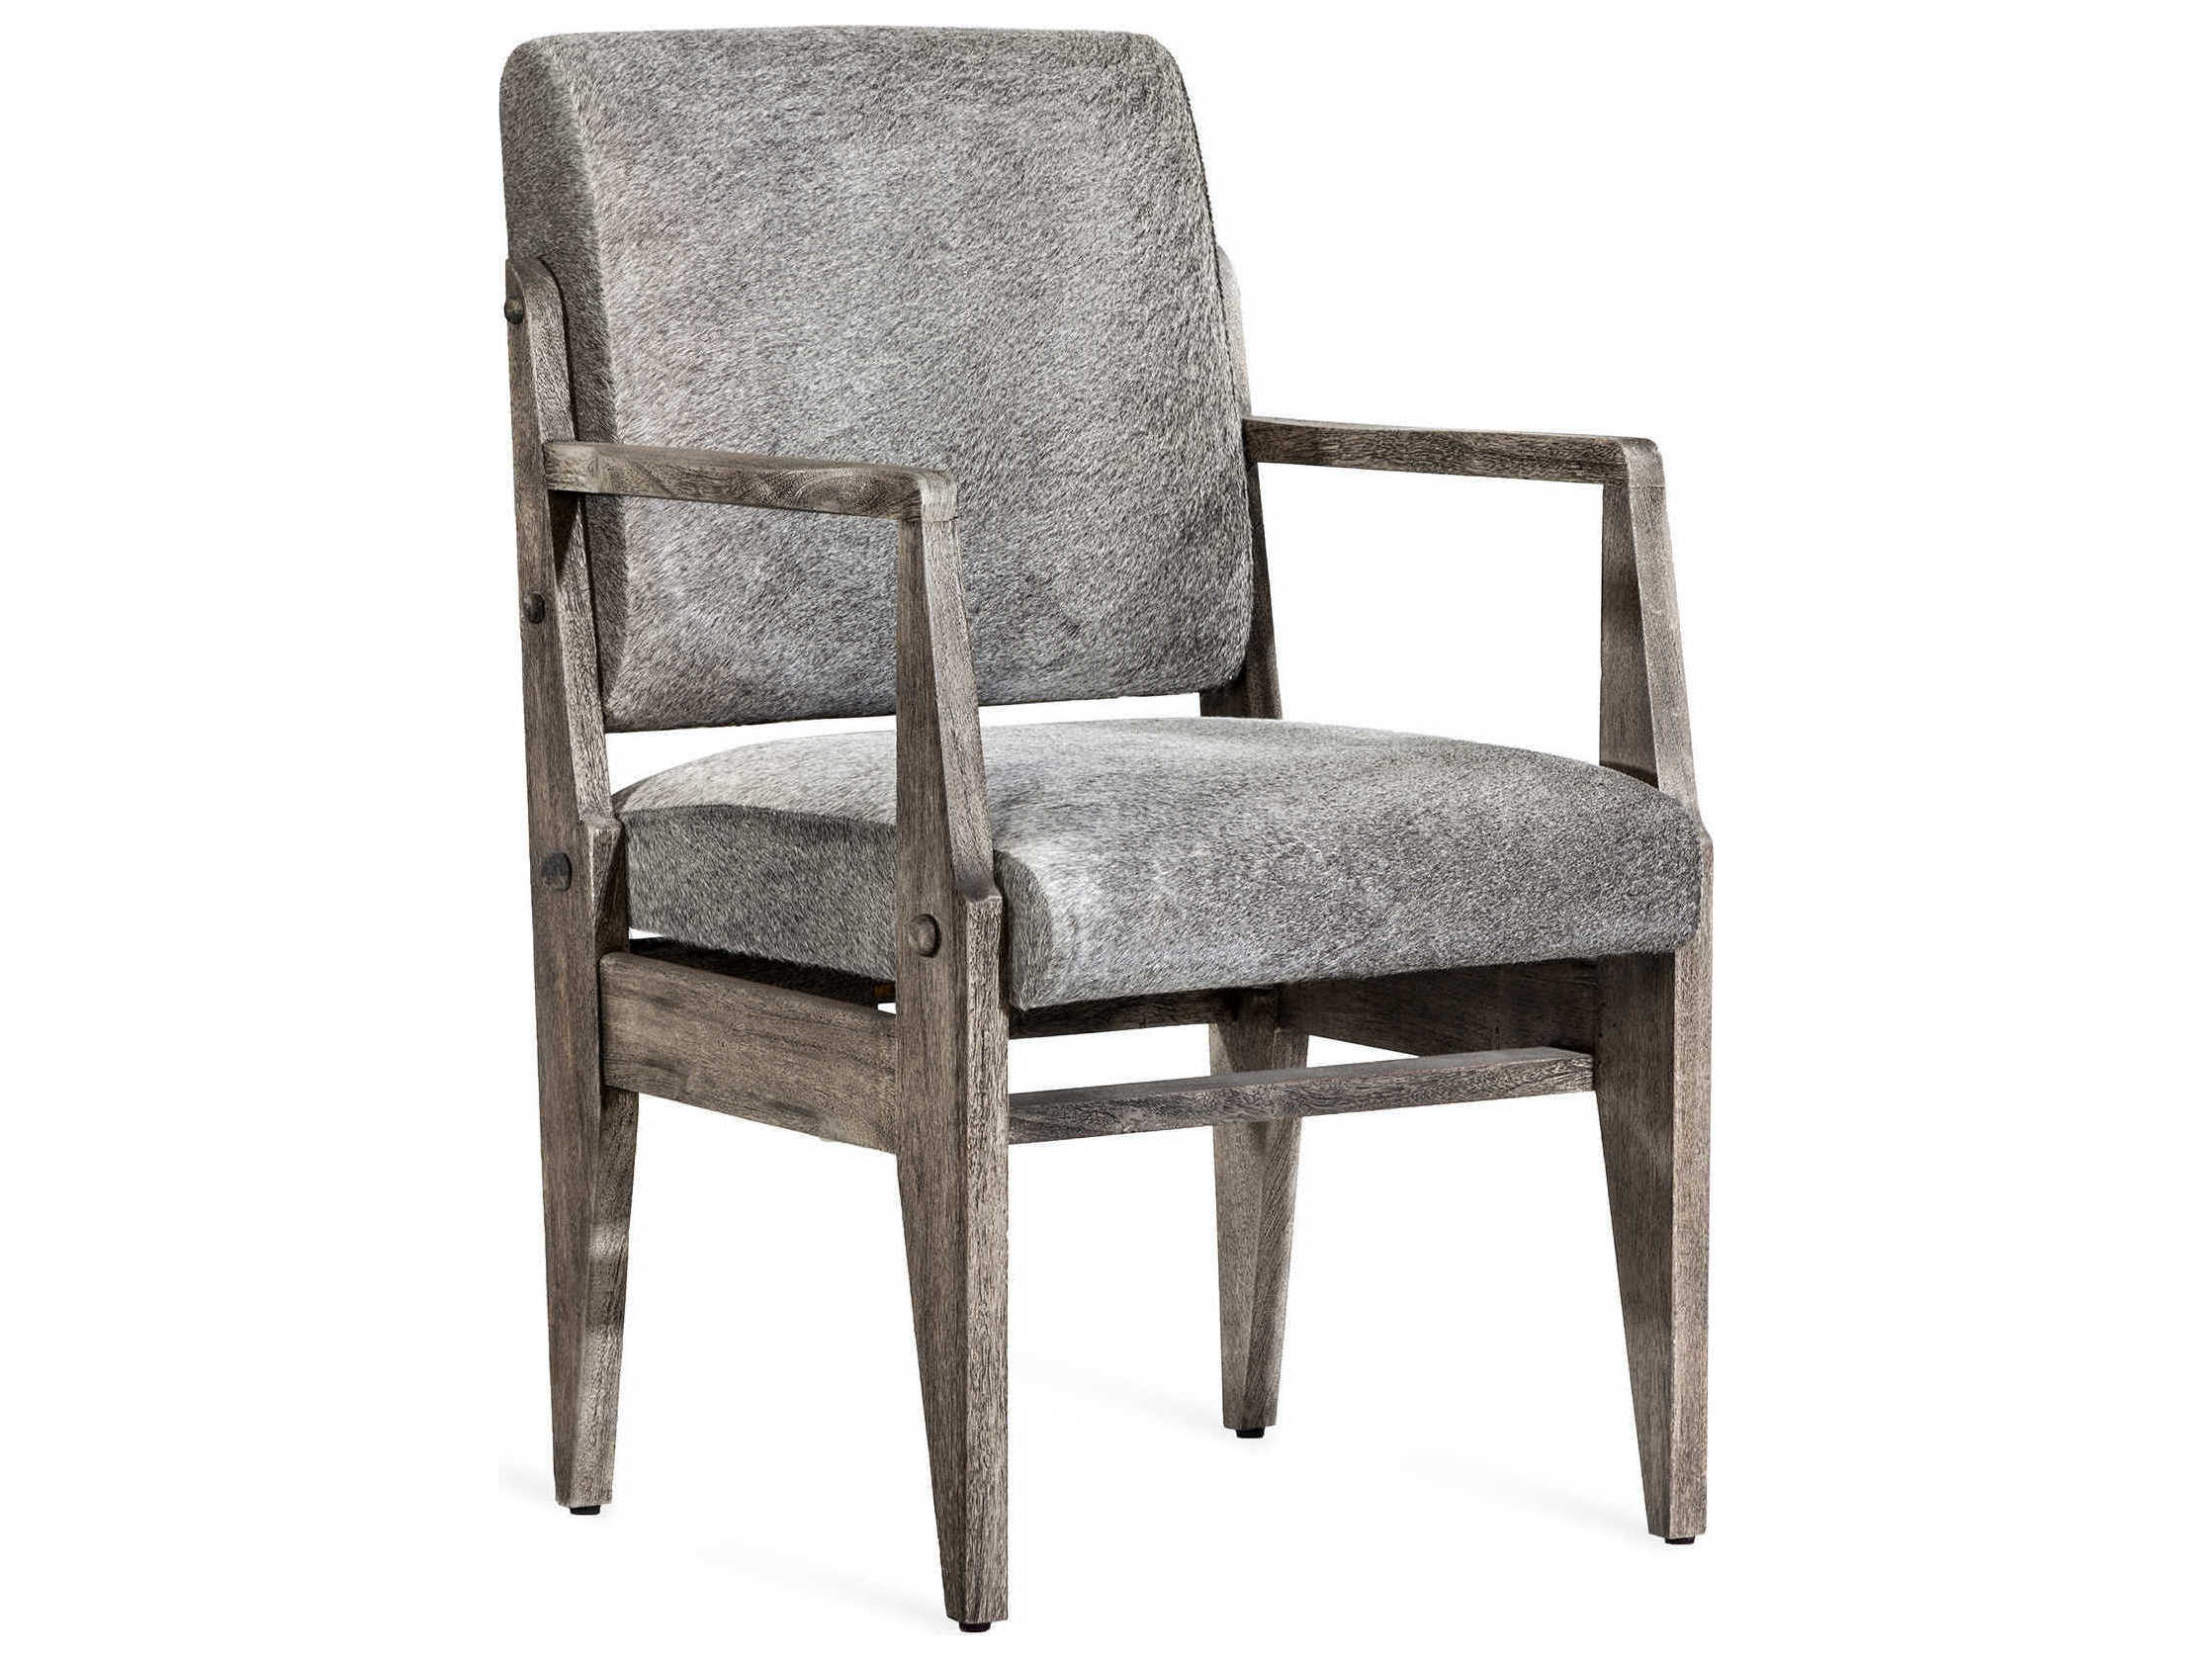 Find 58+ Alluring hale dining room chairs Satisfy Your Imagination